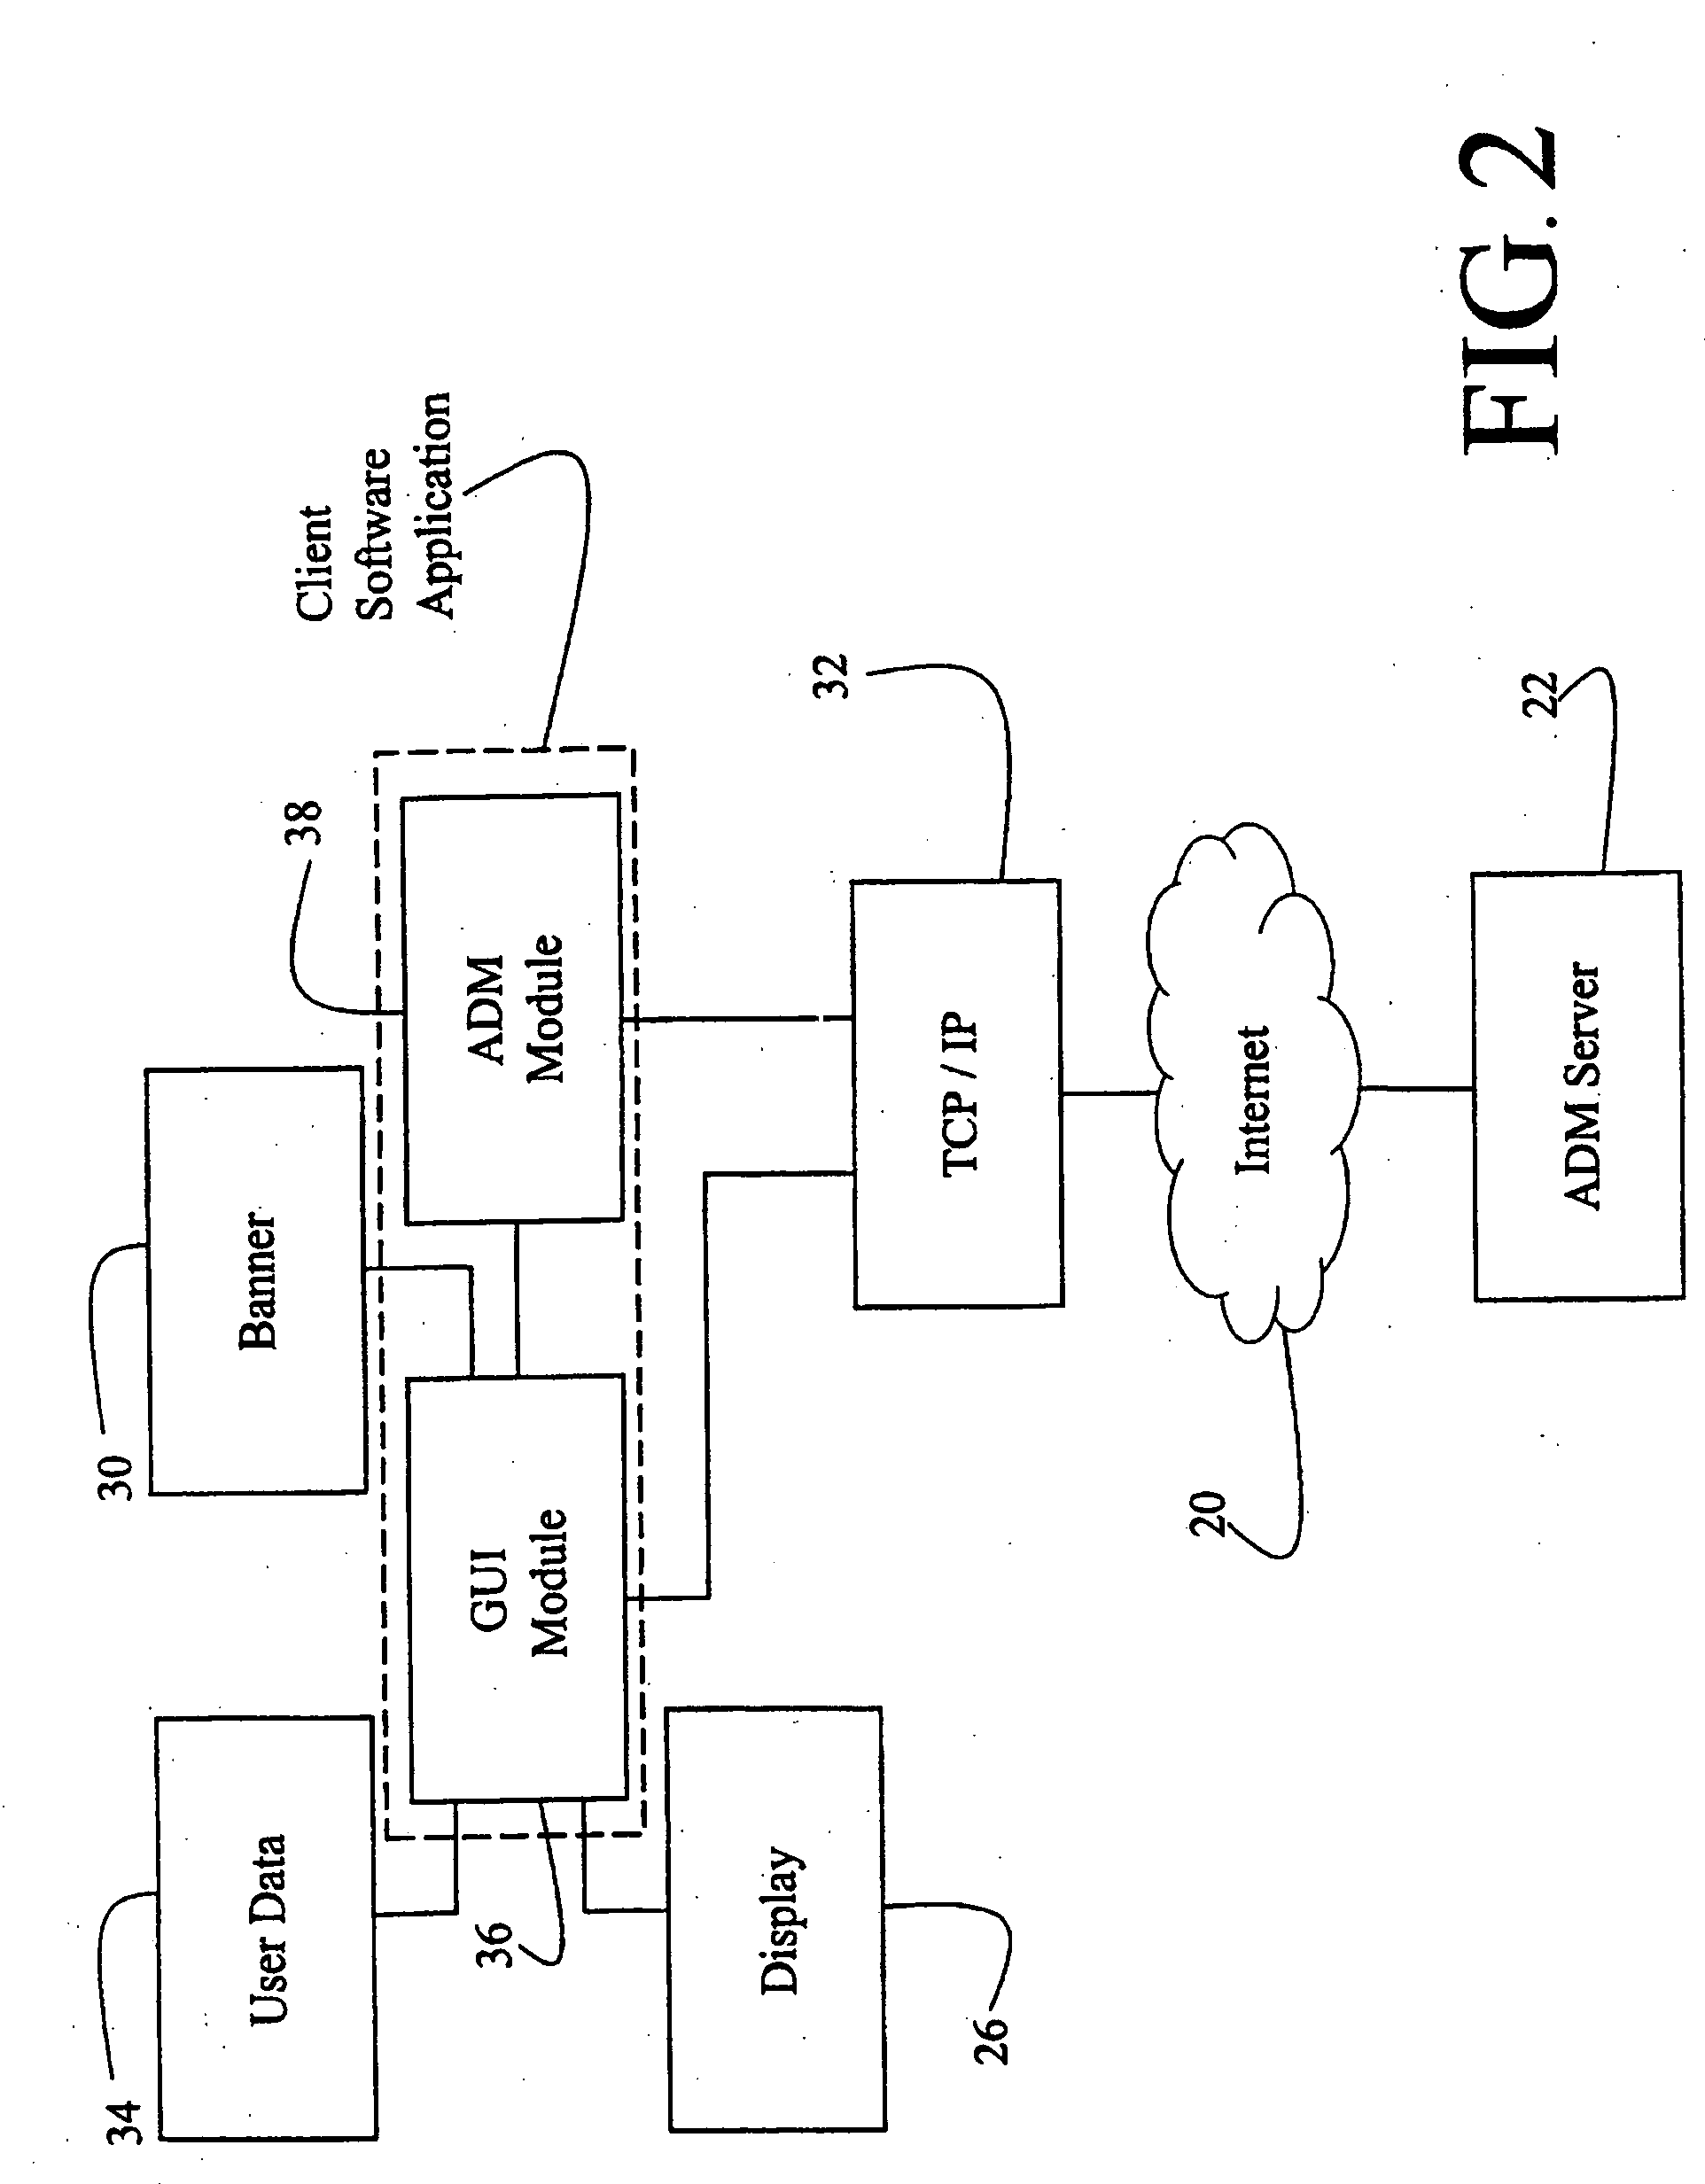 Computer interface method and apparatus with portable network organization system and targeted advertising